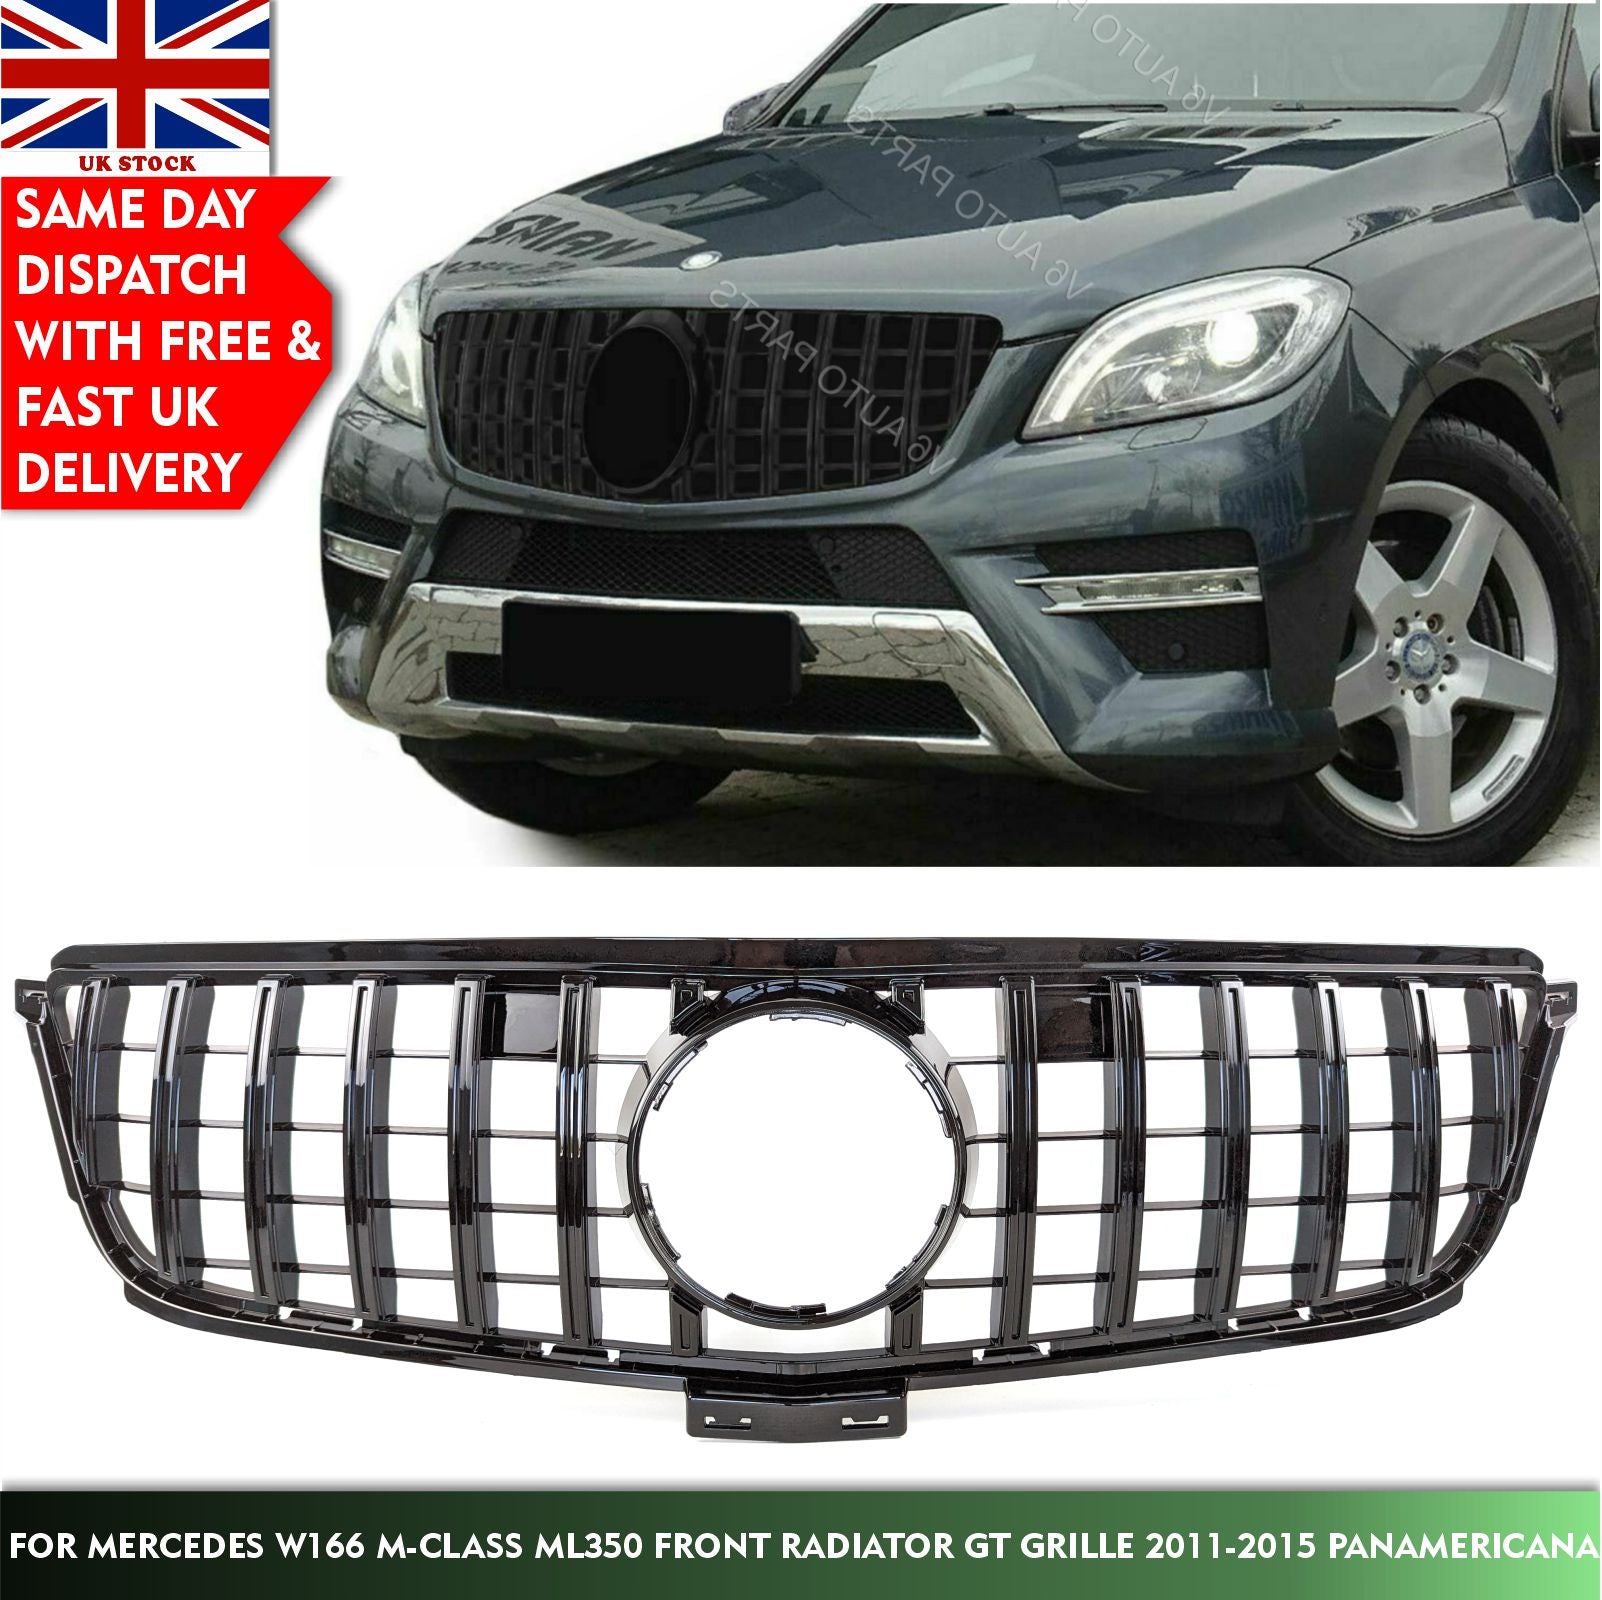 For Mercedes W166 M-Class ML350 Front Radiator GT Grille 2011-2015 Panamericana